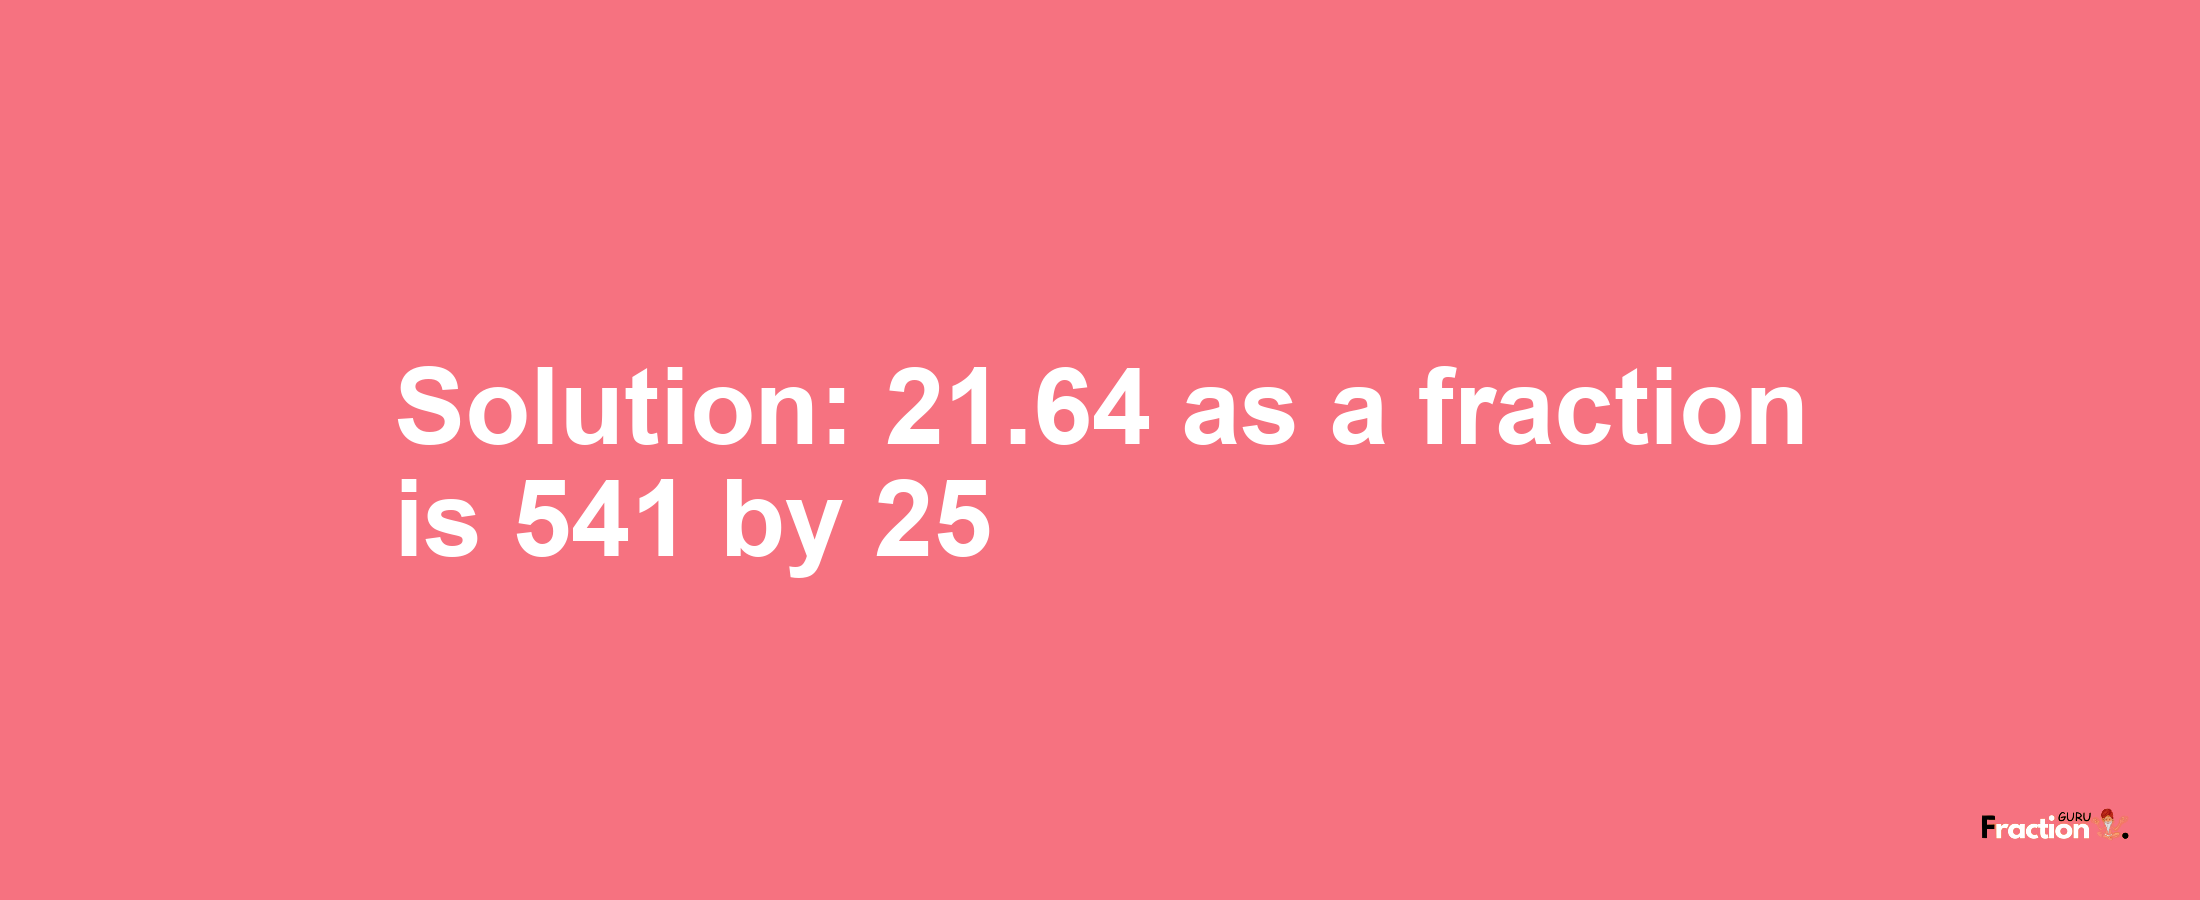 Solution:21.64 as a fraction is 541/25